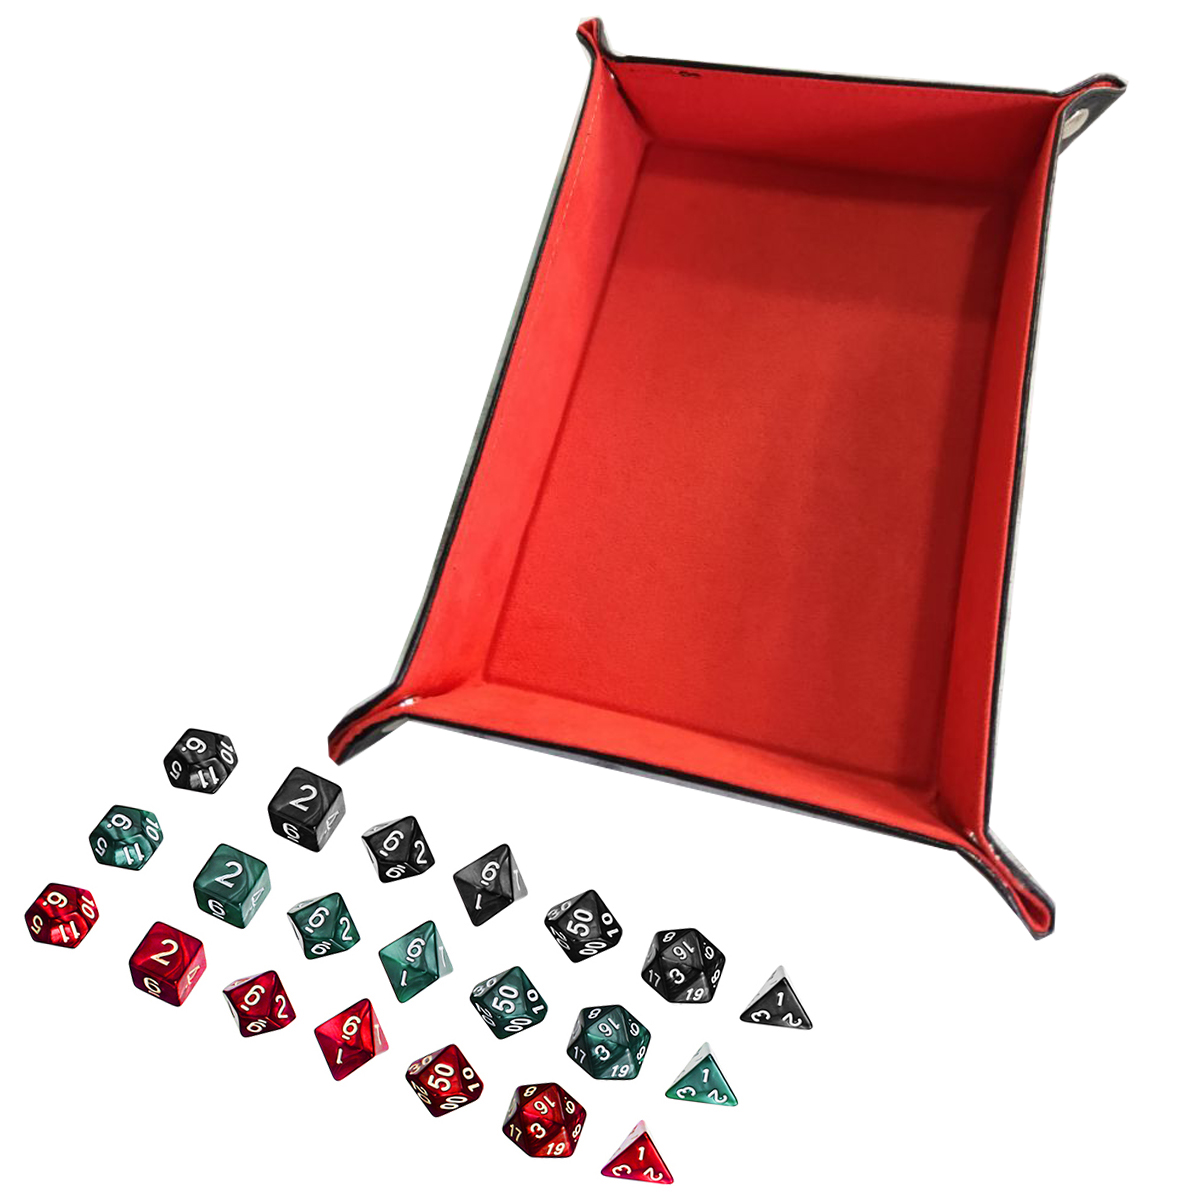 Multisided-Dice-Holder-Polyhedral-Dices-PU-Leather-Folding-Rectangle-Tray-for-RPG-1372549-4